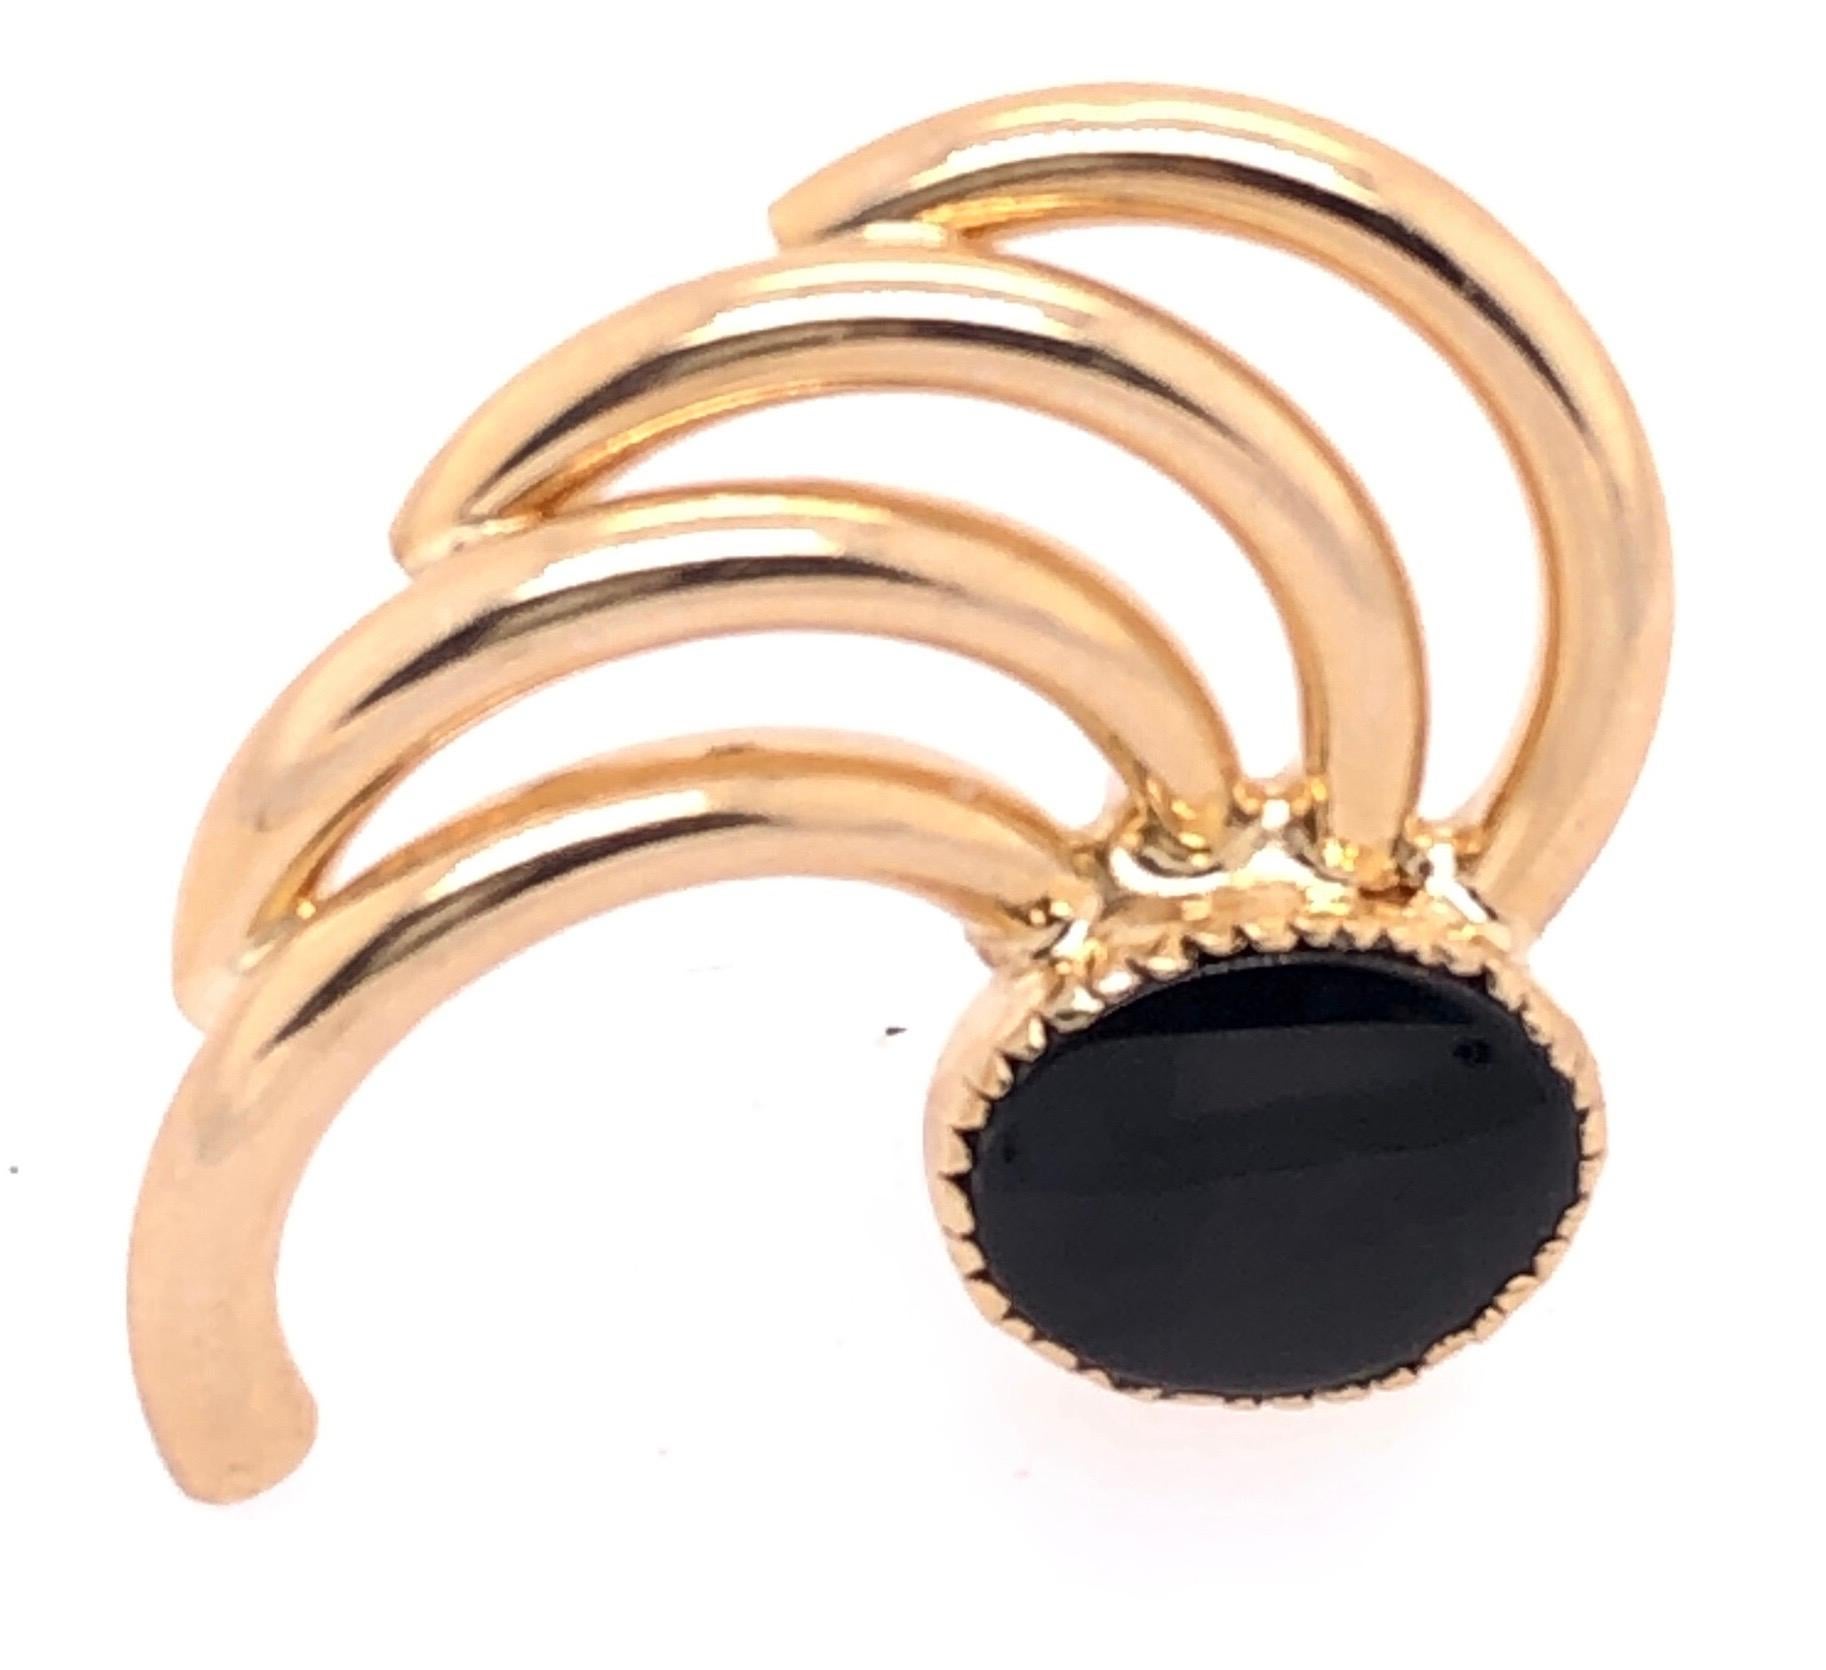 14 Karat Yellow Gold Free Style Onyx Earrings .
4.31 grams total weight.